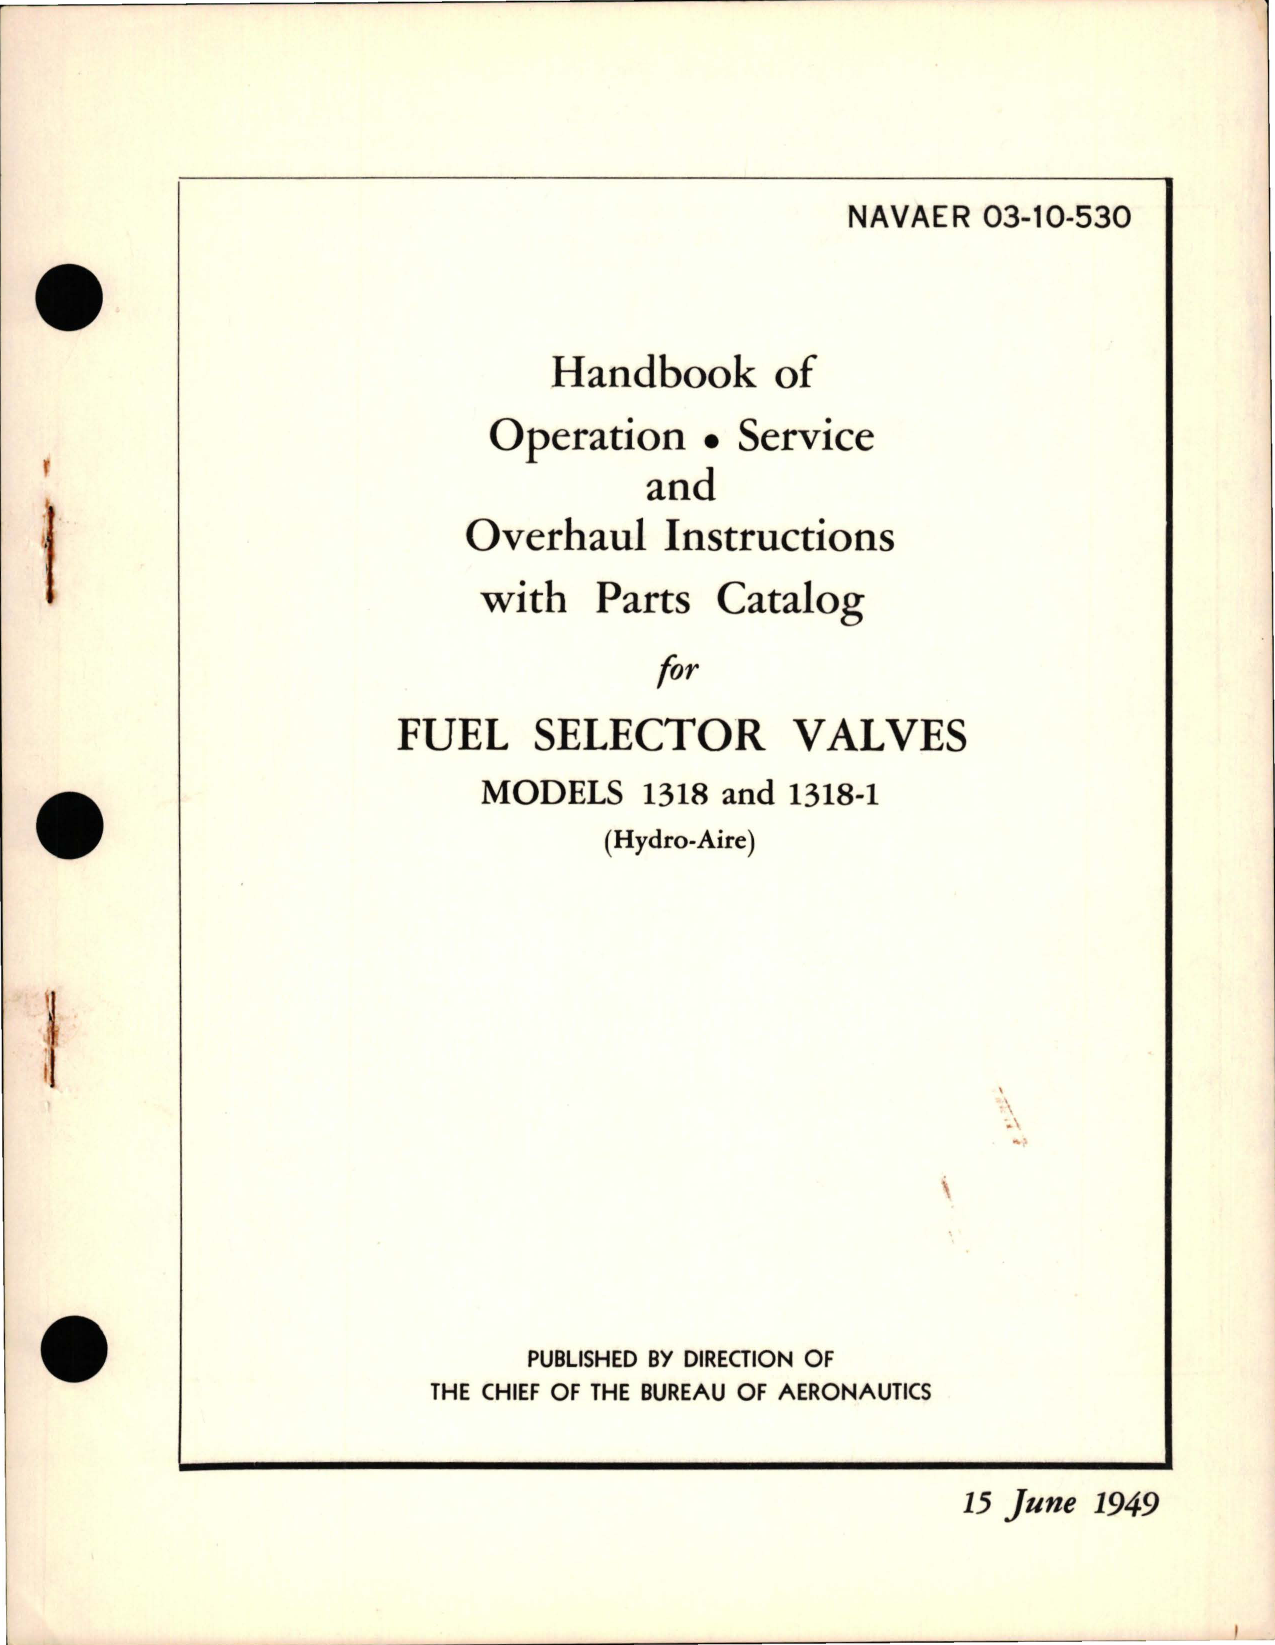 Sample page 1 from AirCorps Library document: Operation, Service and Overhaul Instructions with Parts Catalog for Fuel Selector Valves - Models 1318 and 1318-1 